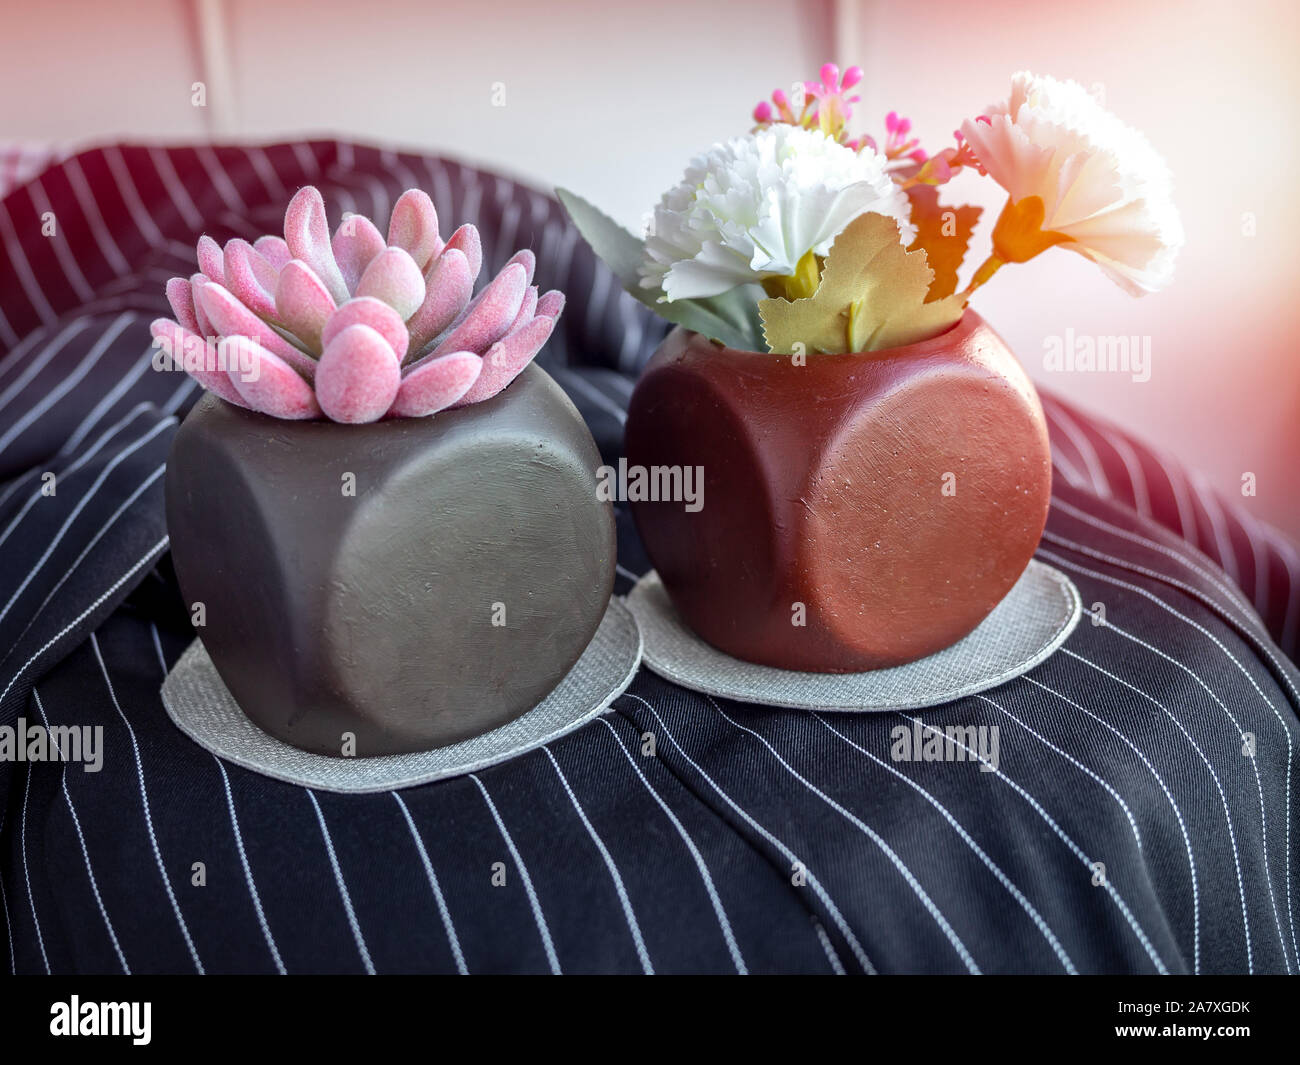 Pink succulent plant and flowers in modern geometric concrete planters on black fabric background. Beautiful painted concrete pots. Stock Photo